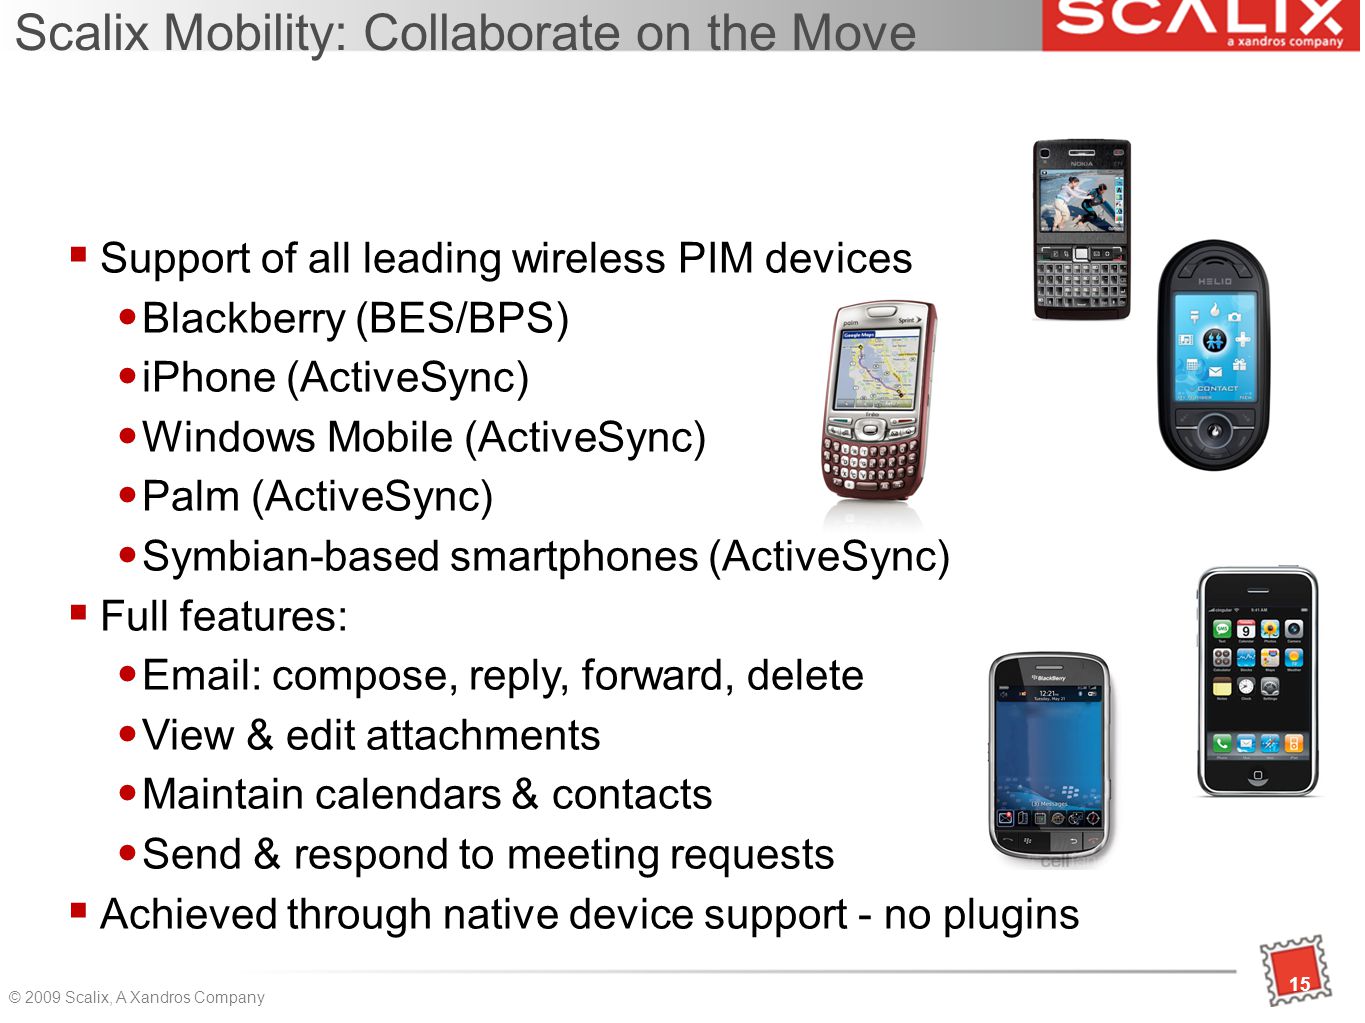 15 © 2009 Scalix, A Xandros Company 15 Scalix Mobility: Collaborate on the Move  Support of all leading wireless PIM devices Blackberry (BES/BPS)‏ iPhone (ActiveSync)‏ Windows Mobile (ActiveSync)‏ Palm (ActiveSync)‏ Symbian-based smartphones (ActiveSync)‏  Full features:   compose, reply, forward, delete View & edit attachments Maintain calendars & contacts Send & respond to meeting requests  Achieved through native device support - no plugins